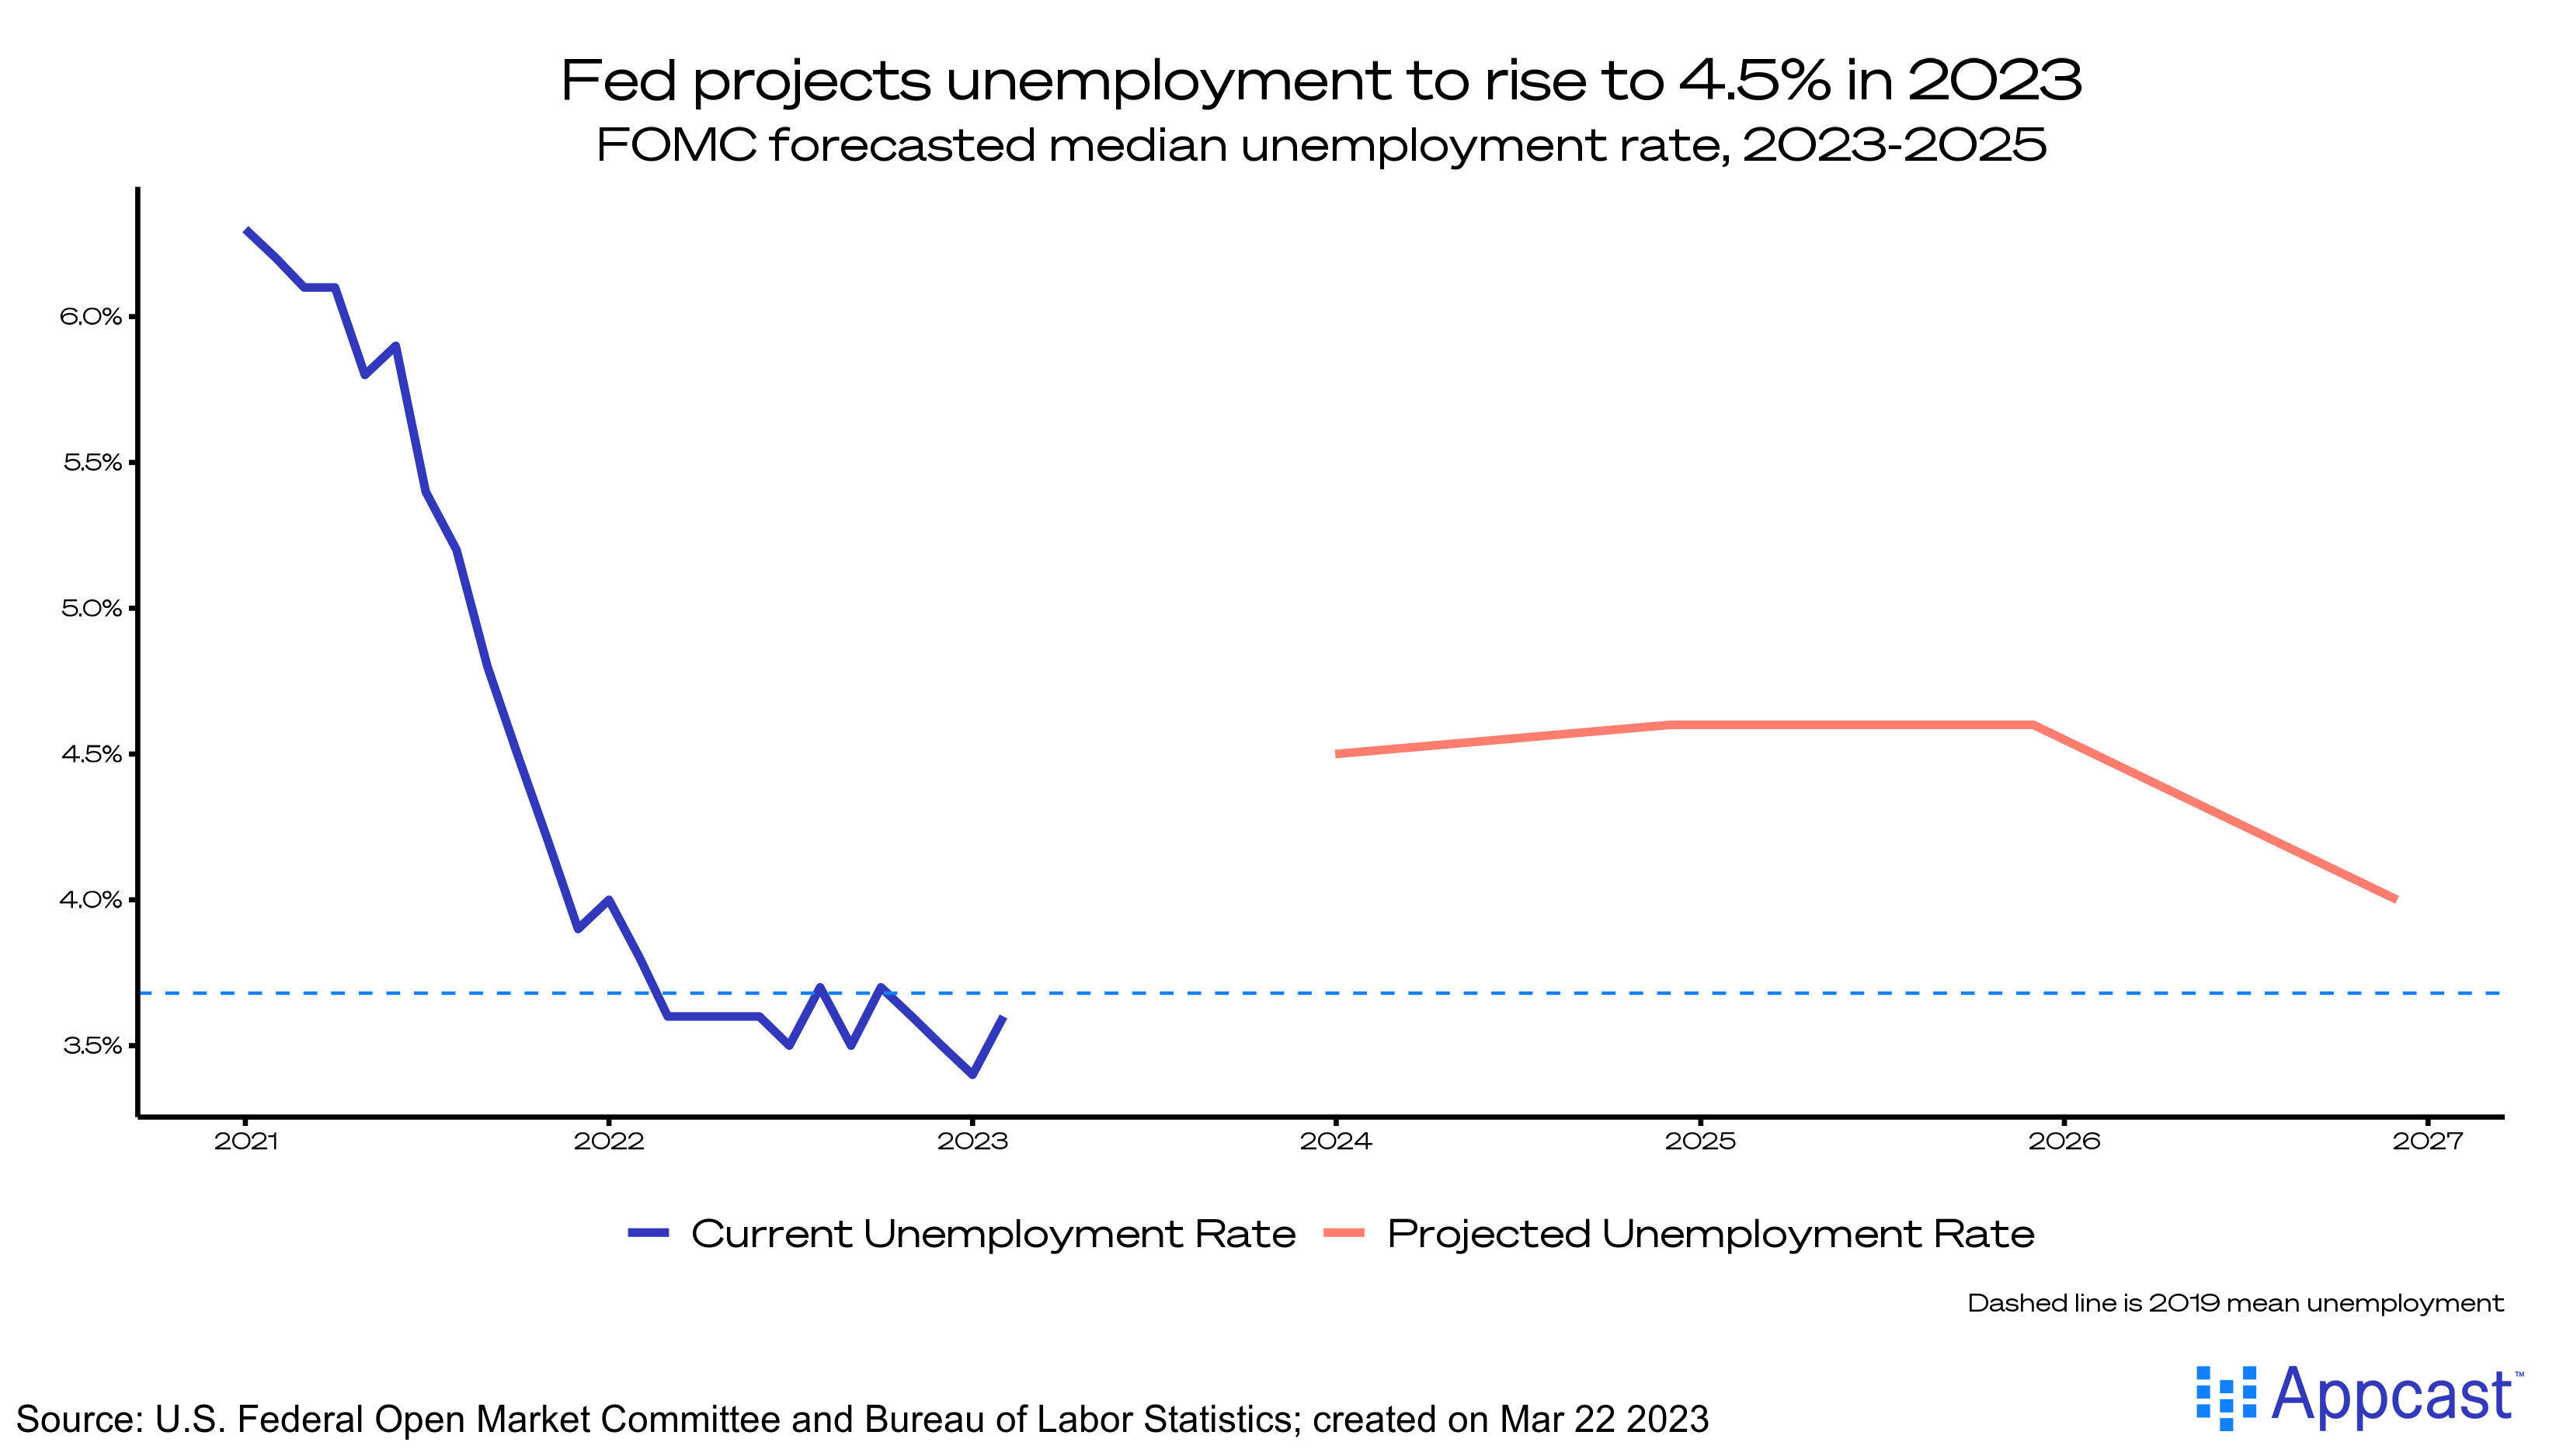 Fed projections of unemployment up to 2027. In 2023, the central bank expects the labor market to slow and the unemployment rate to rise to 4.5%. Created on March 22, 2023 for Appcast. 